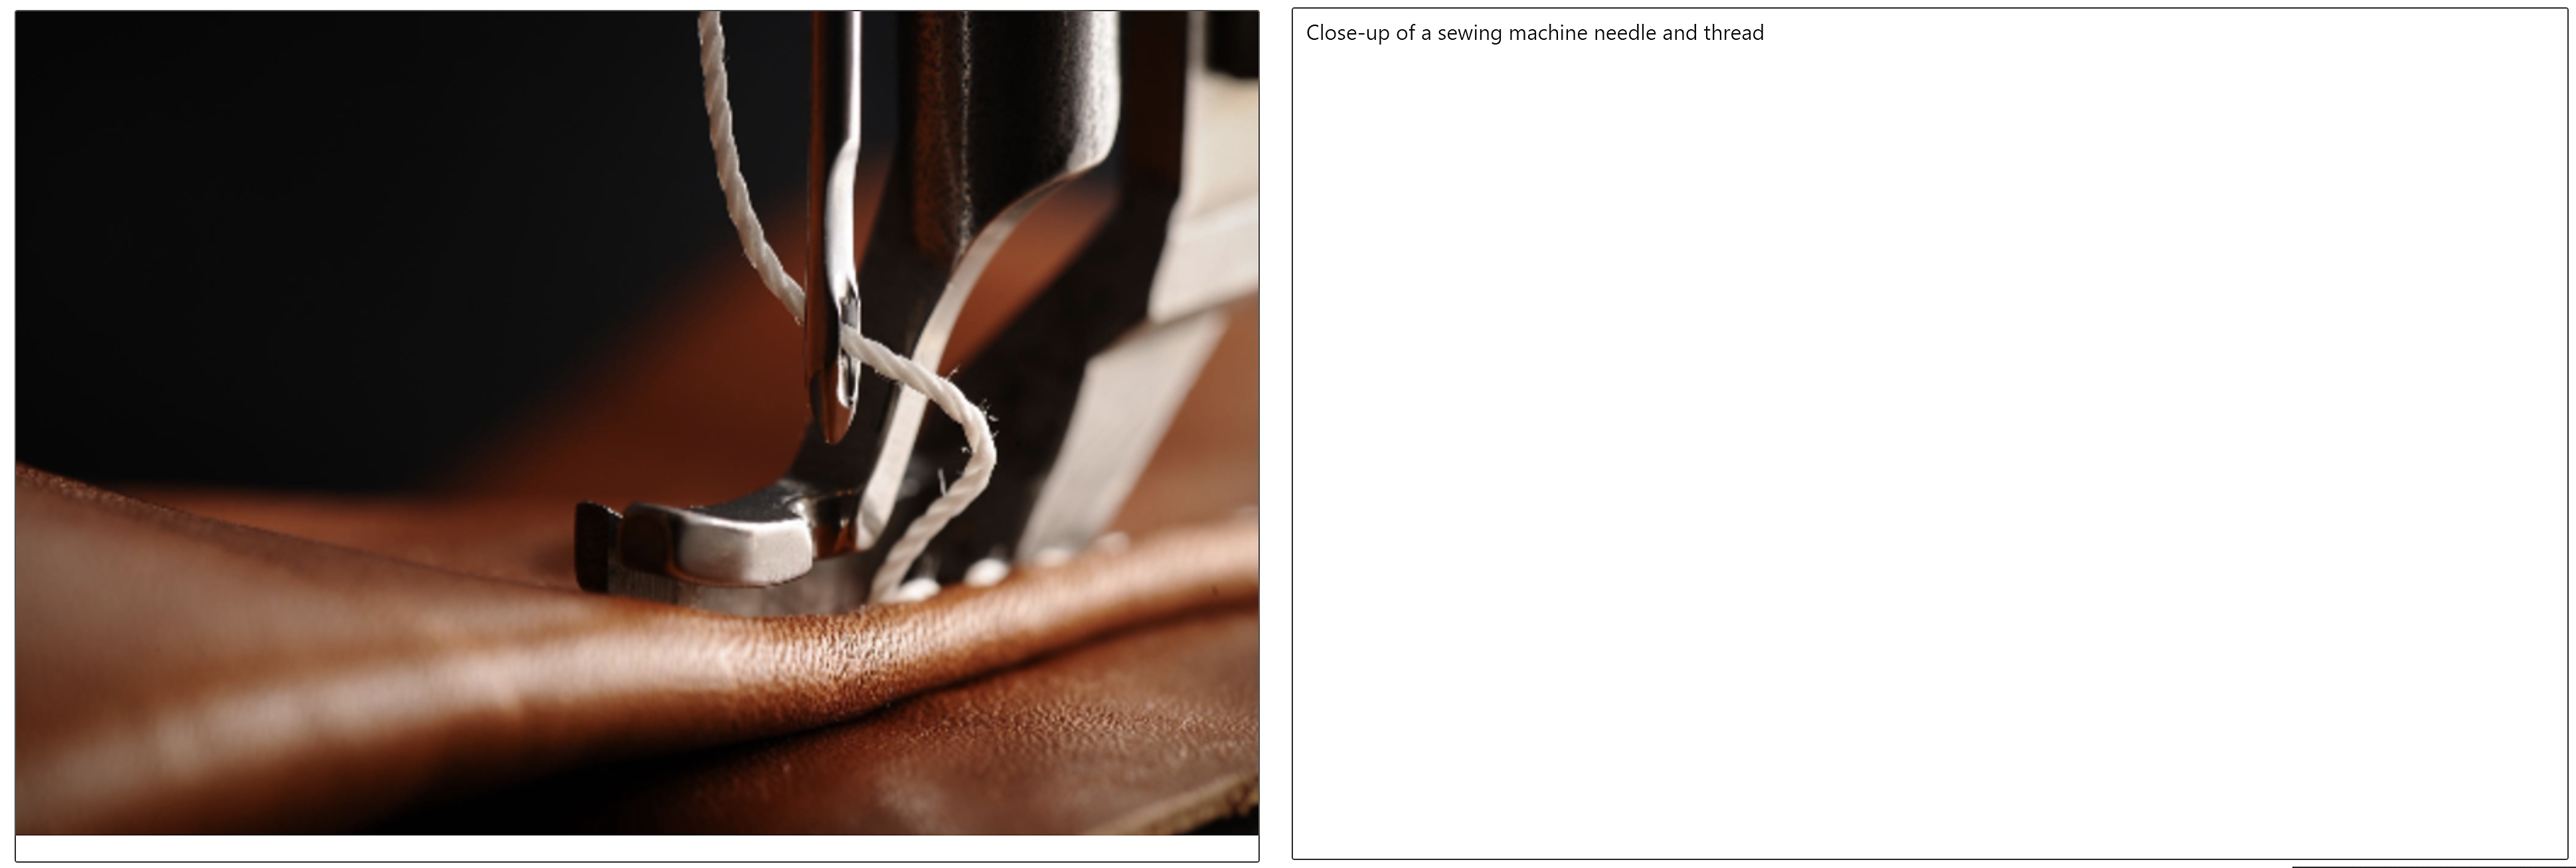 A close-up of a sewing machine needle and thread going through leather and a caption of the image next to it 